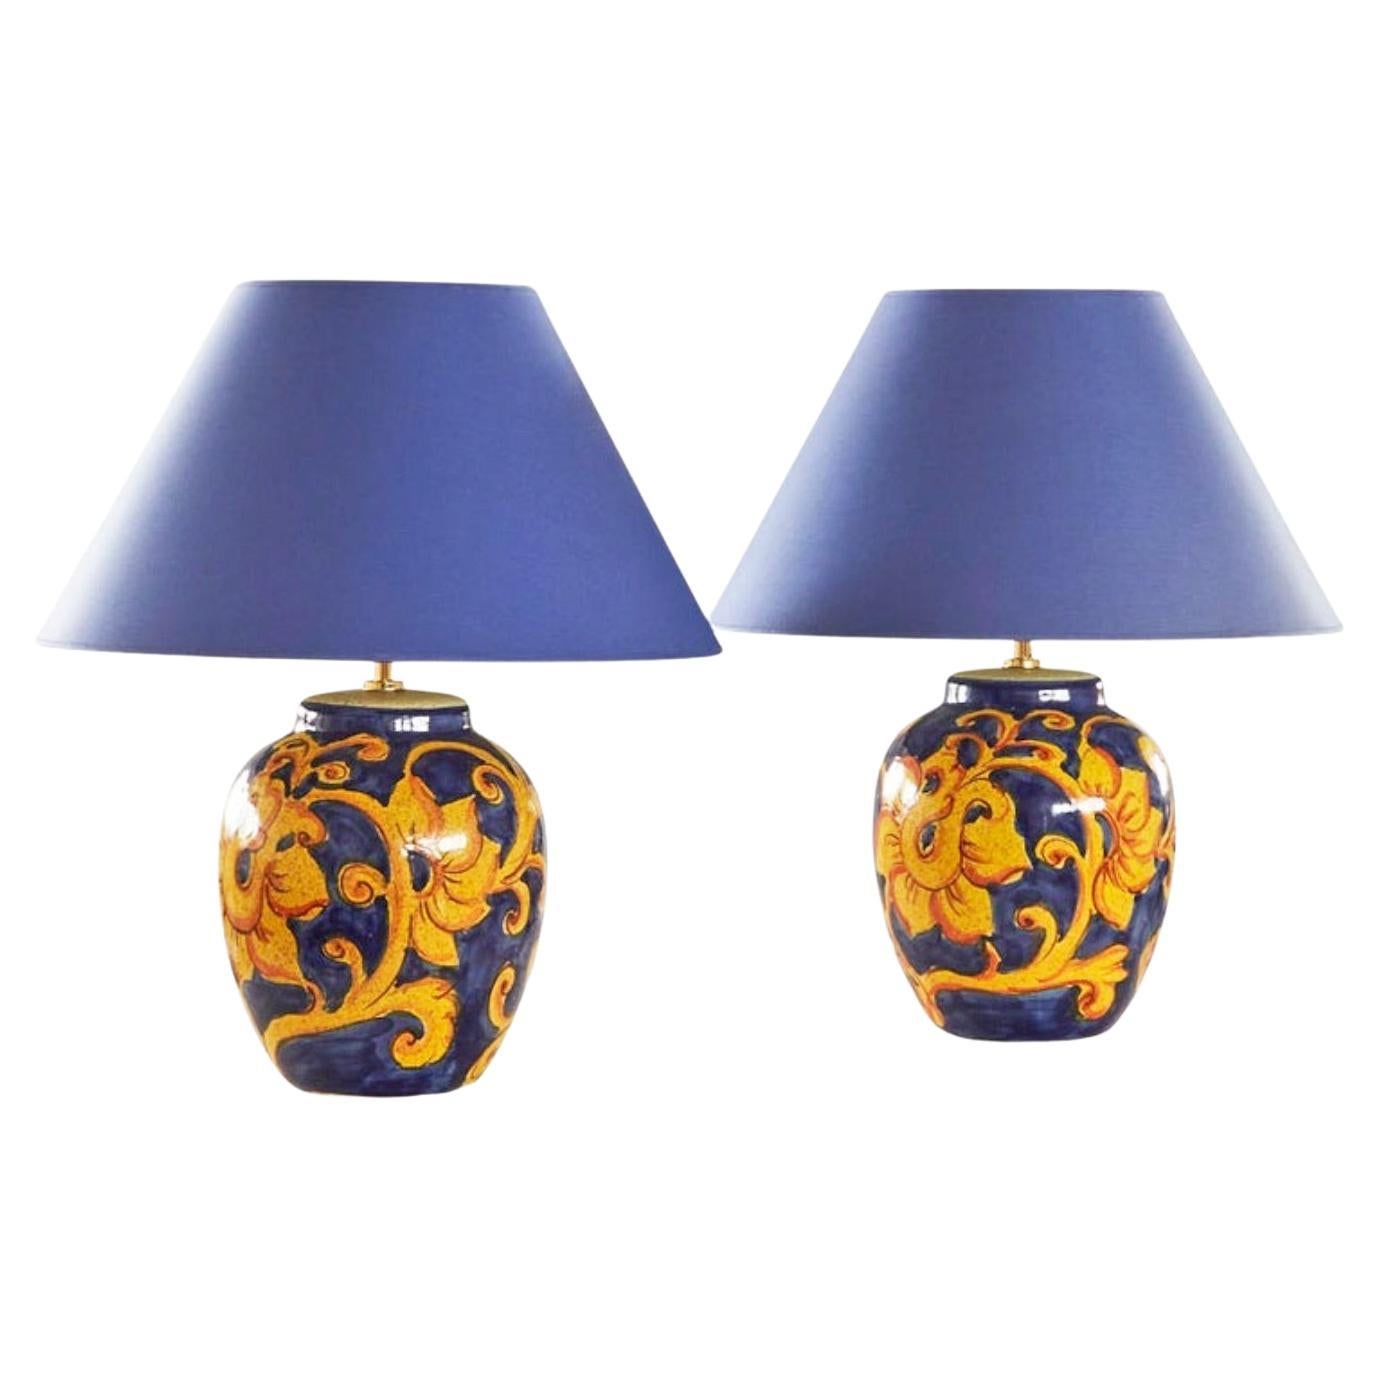 Pair of French Hand Painted Ceramic Table Lamps with Floral Decor 1980s For Sale